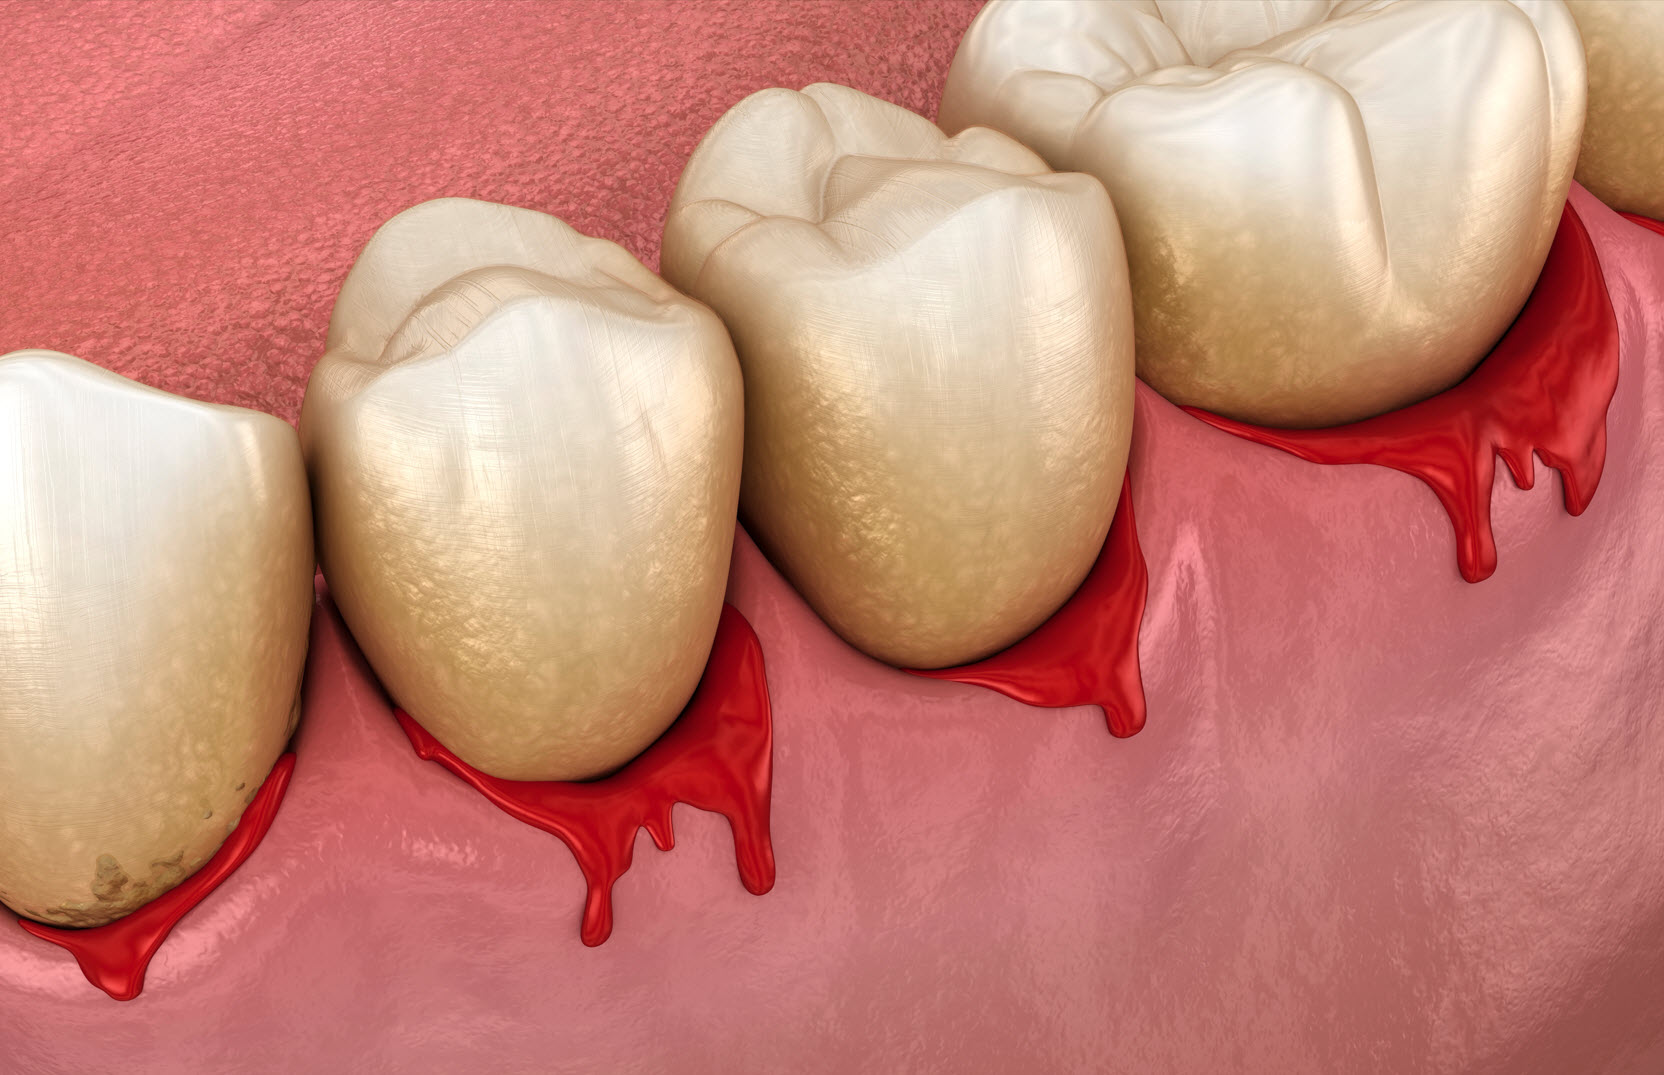 Dental Check-Up: Regular dental visits can help diagnose and treat issues such as bleeding gums early.